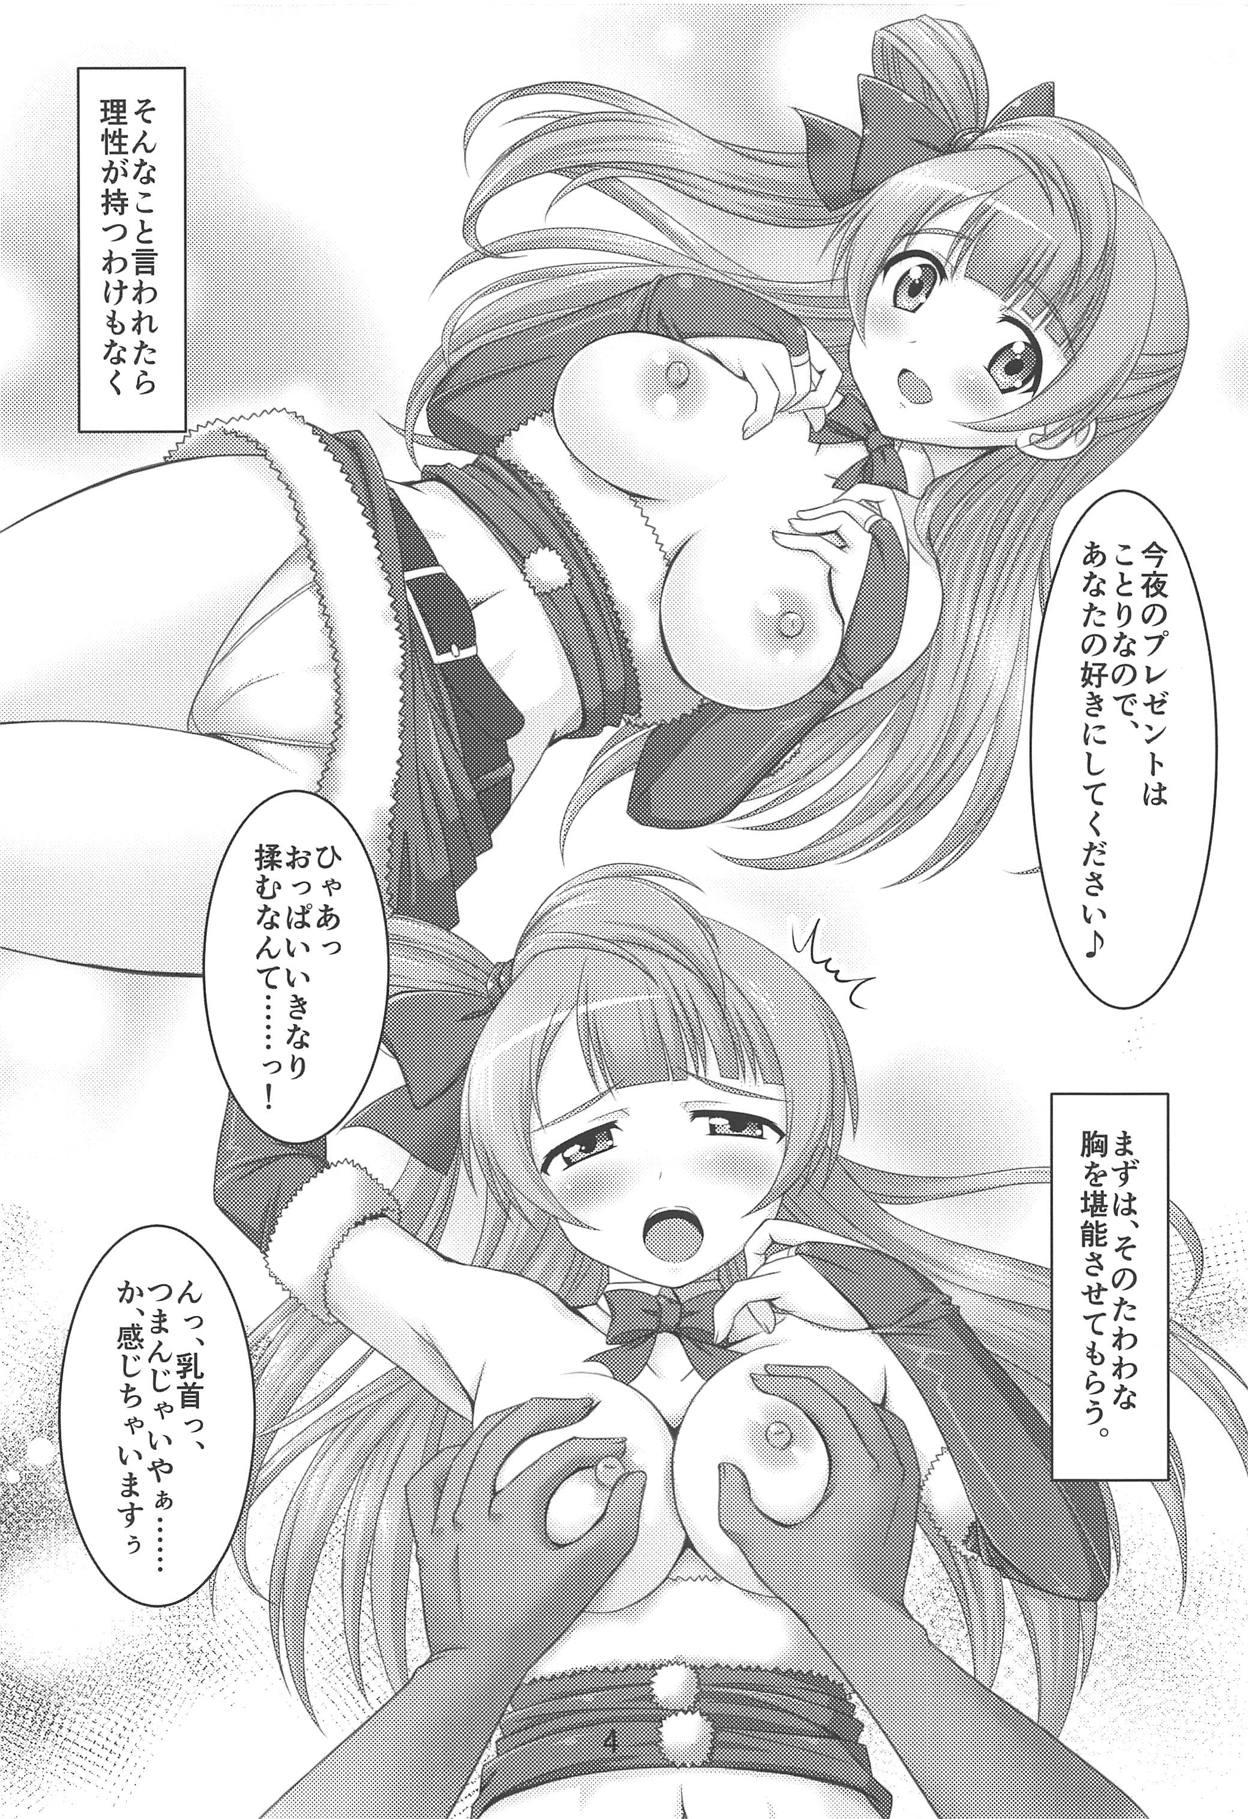 Real Orgasms Kotori to Asa made Issho 3 - Love live And - Page 3